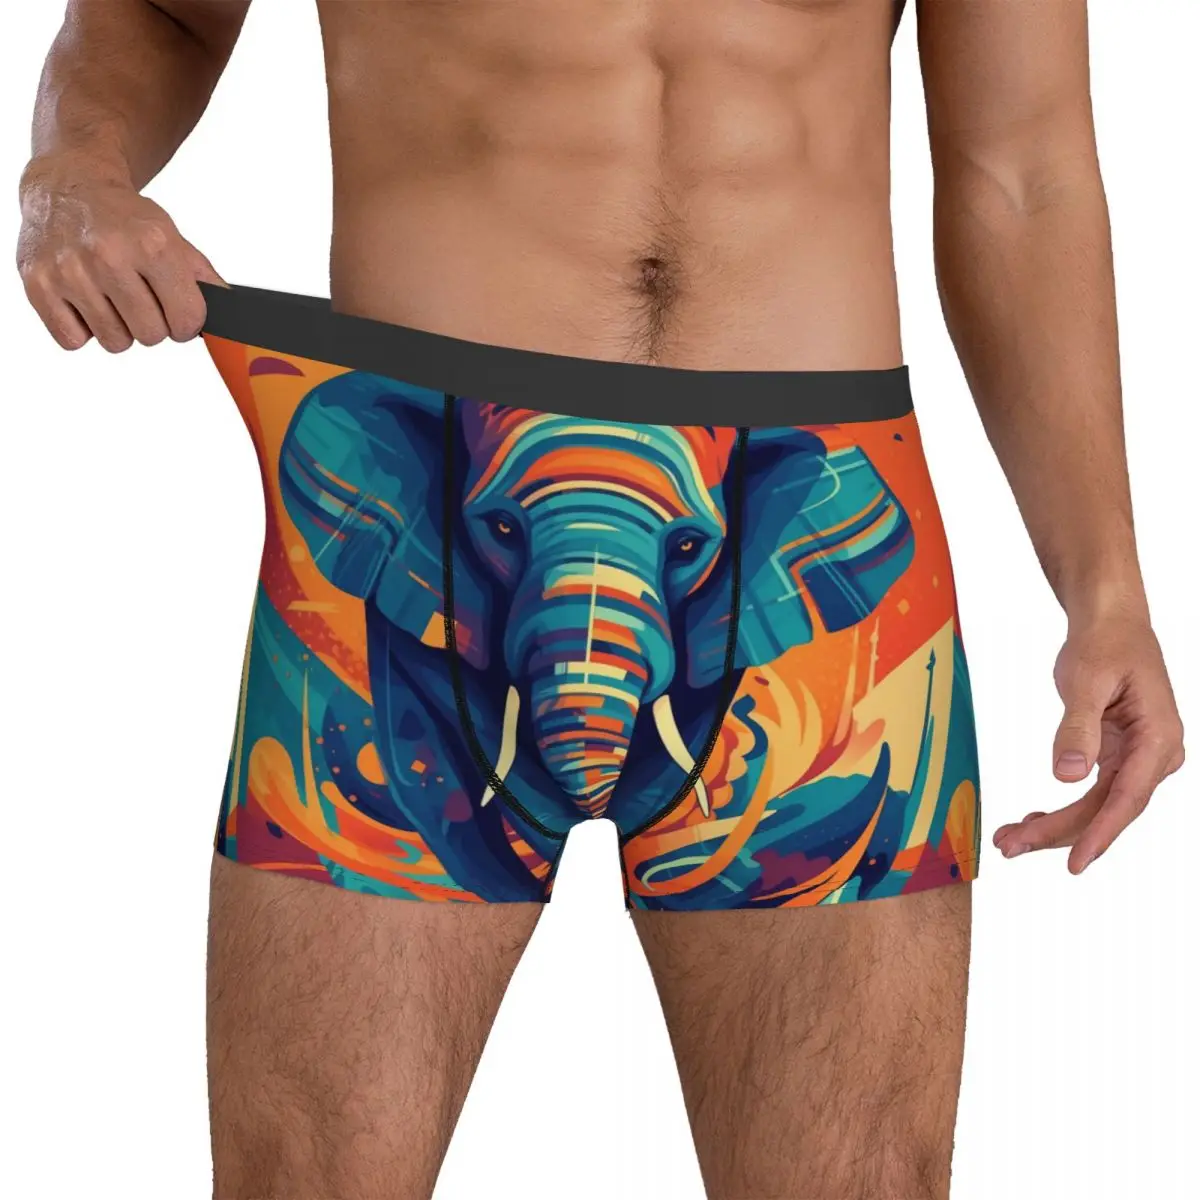 Elephant Underwear Illustration Abstraction Comfortable Panties Printing  Shorts Briefs Pouch Men's Oversize Trunk - AliExpress